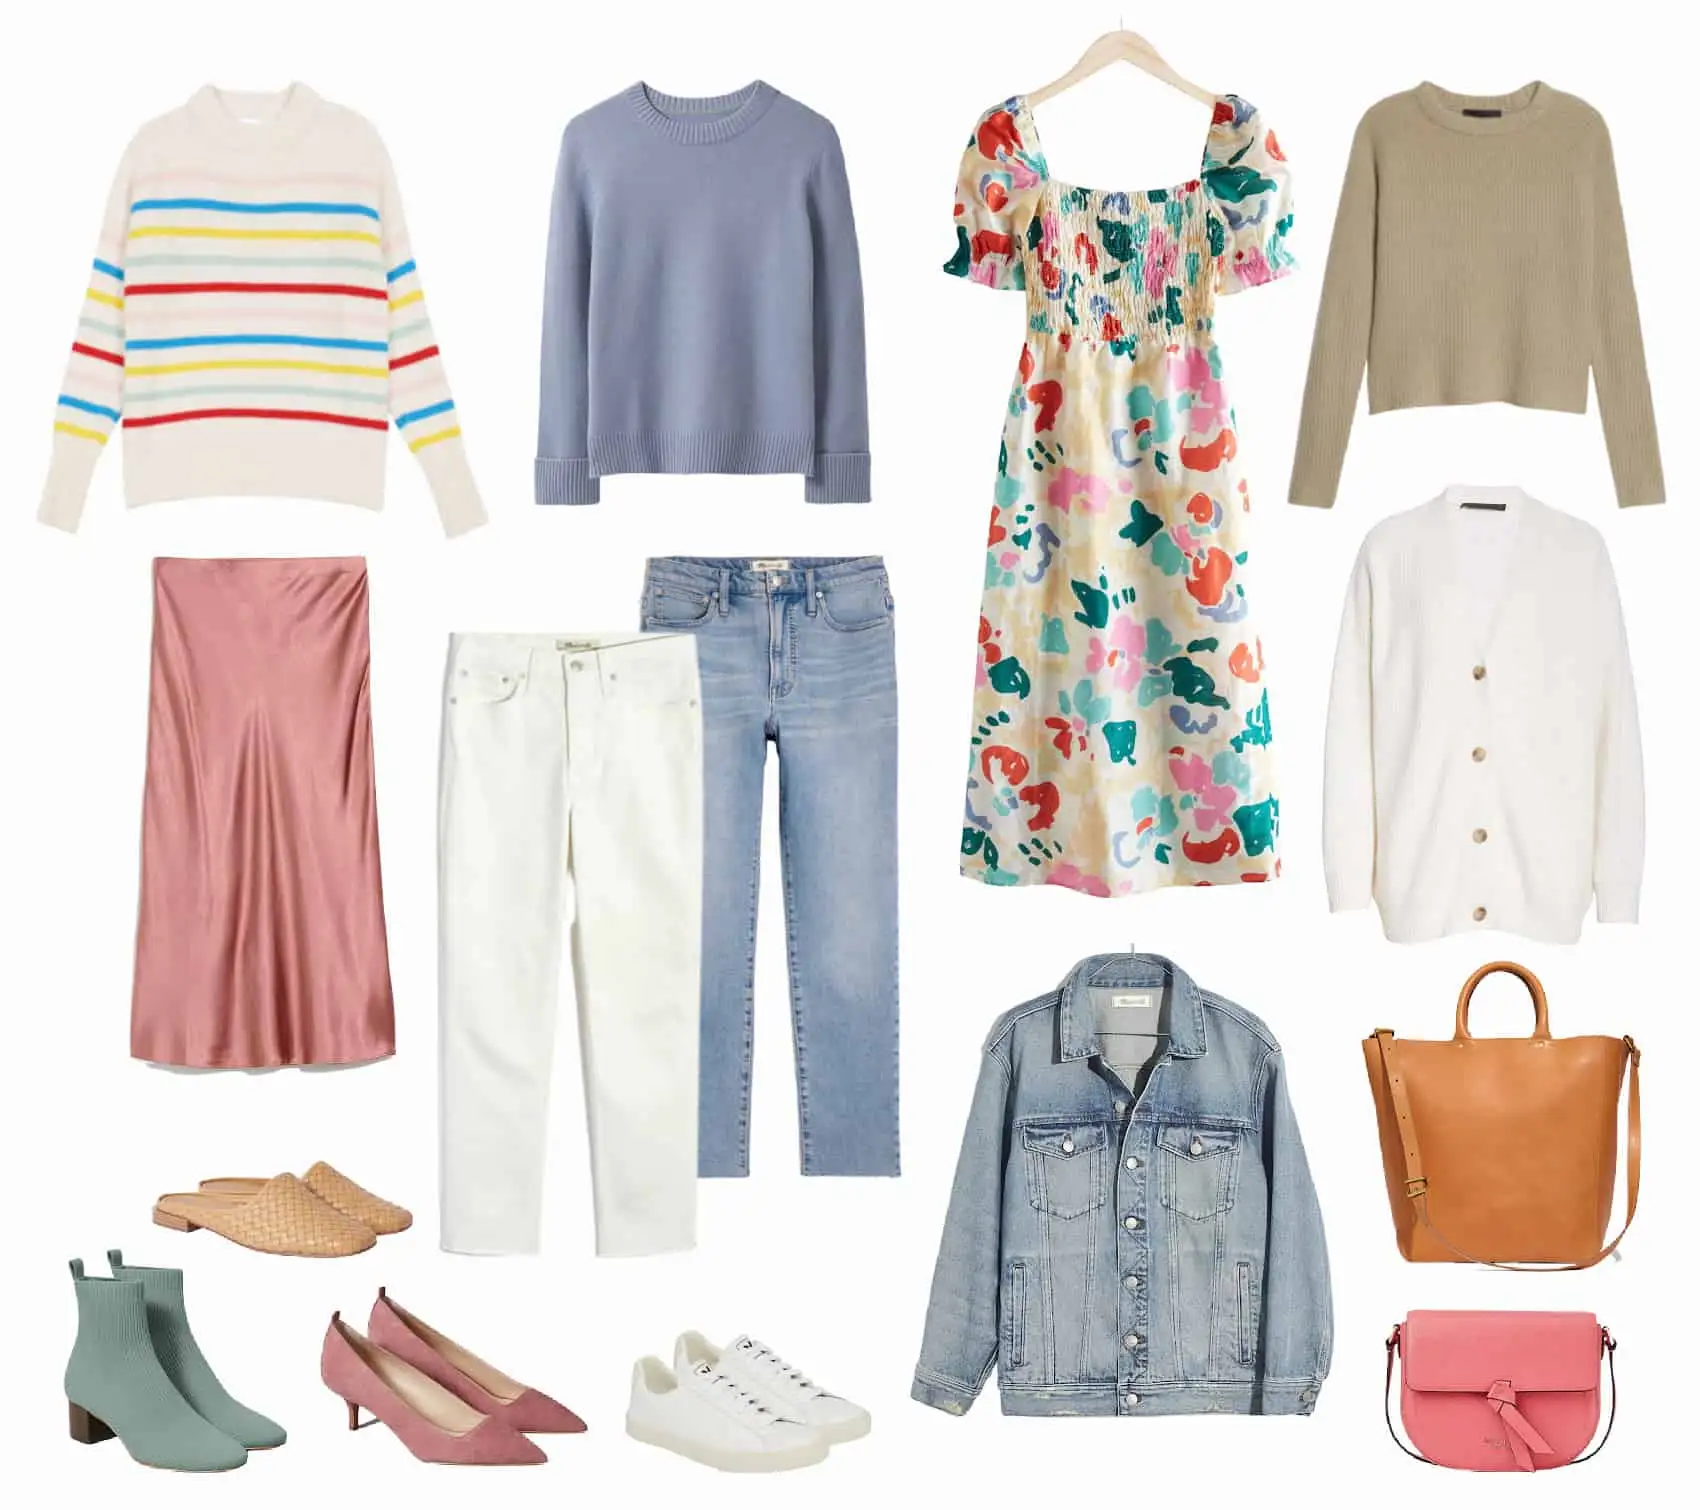 Colorful Capsule Wardrobe: How to Build An Effortless Style